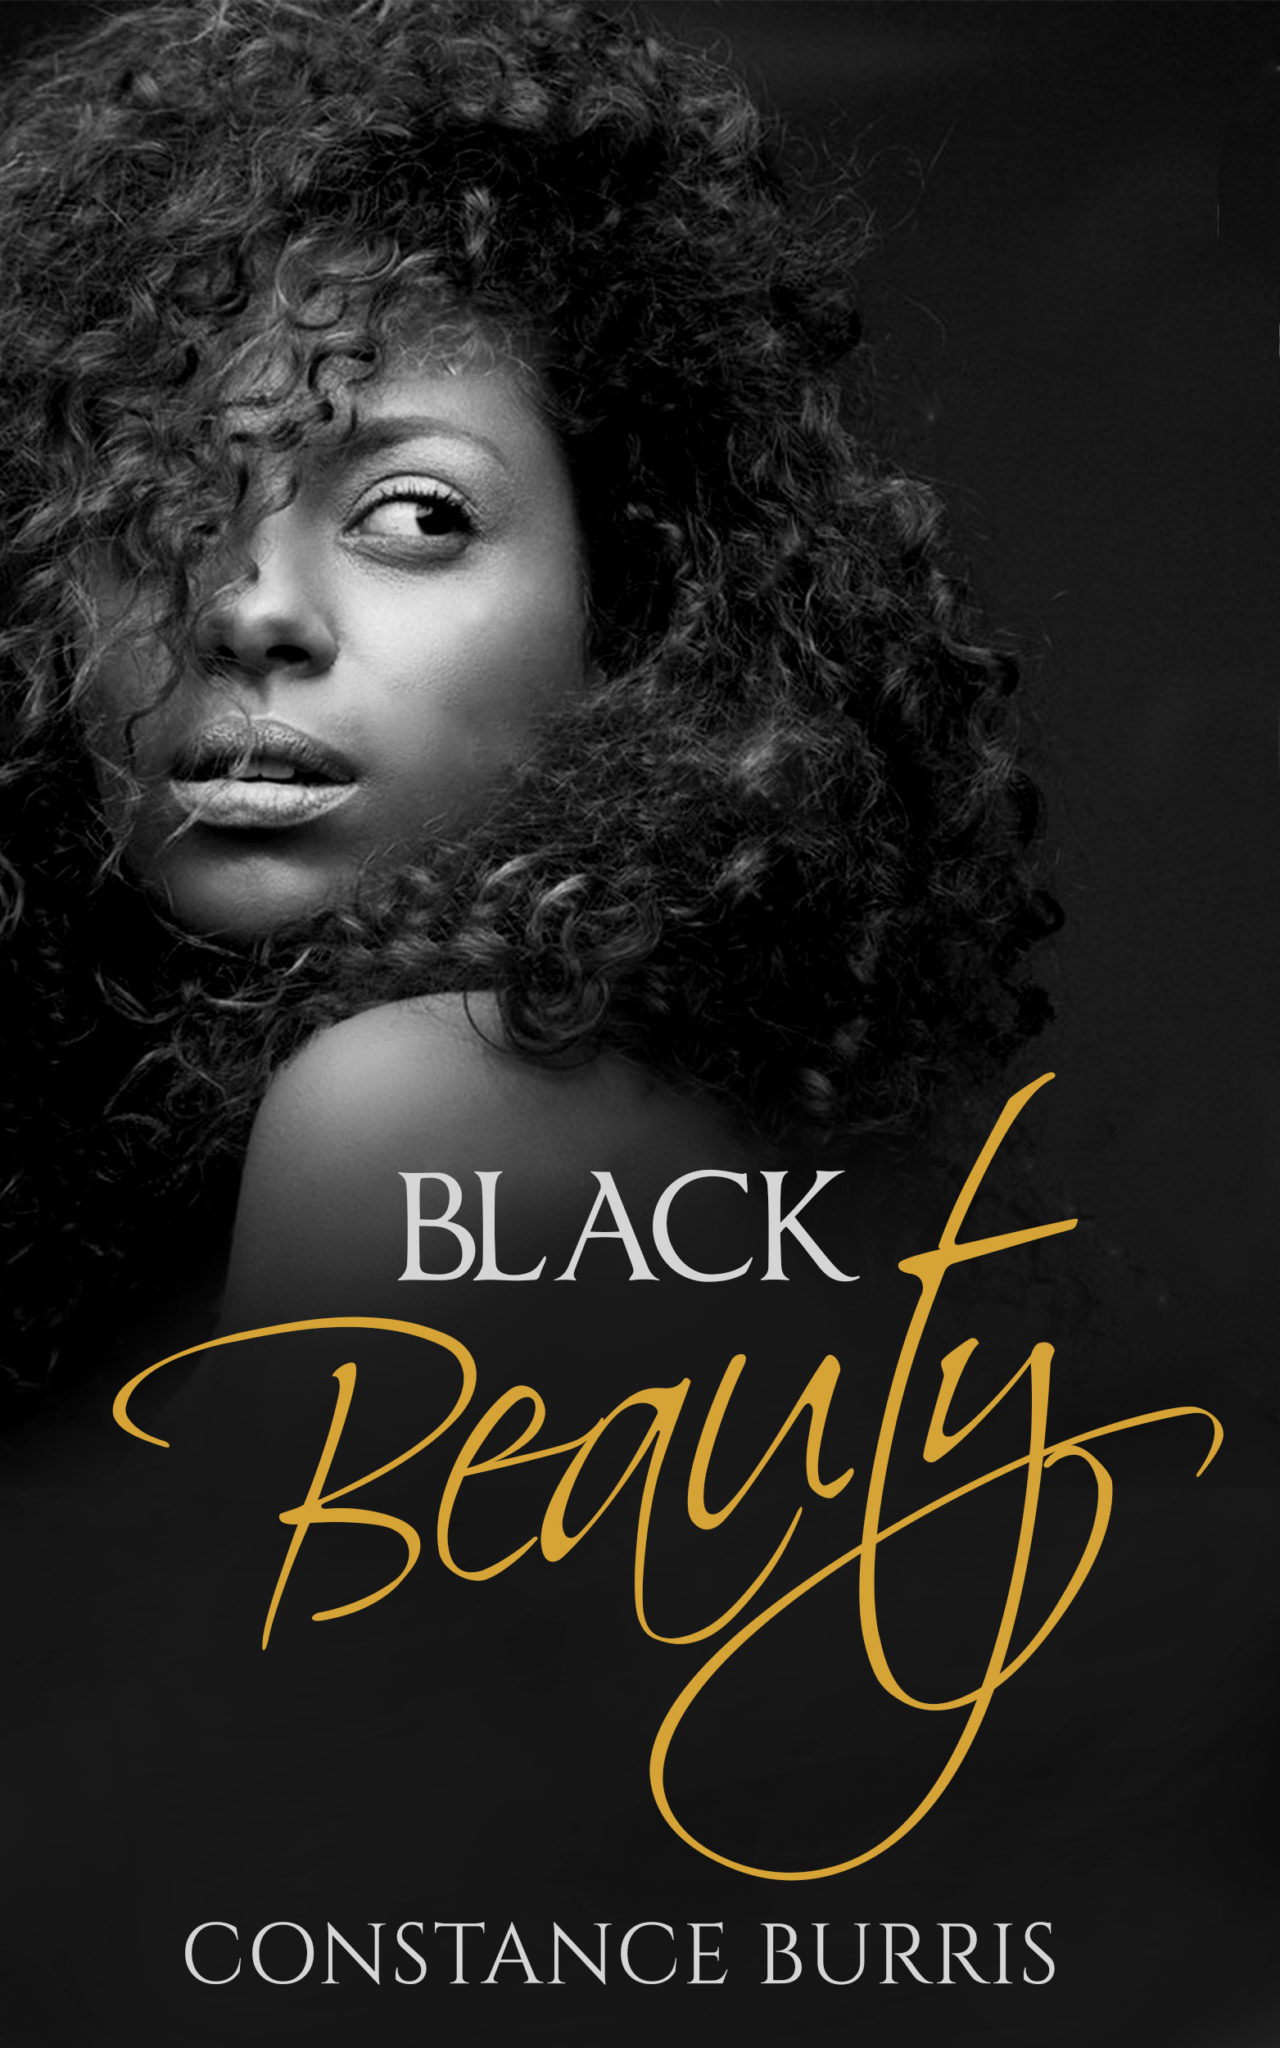 FREE: Black Beauty by Constance Burris